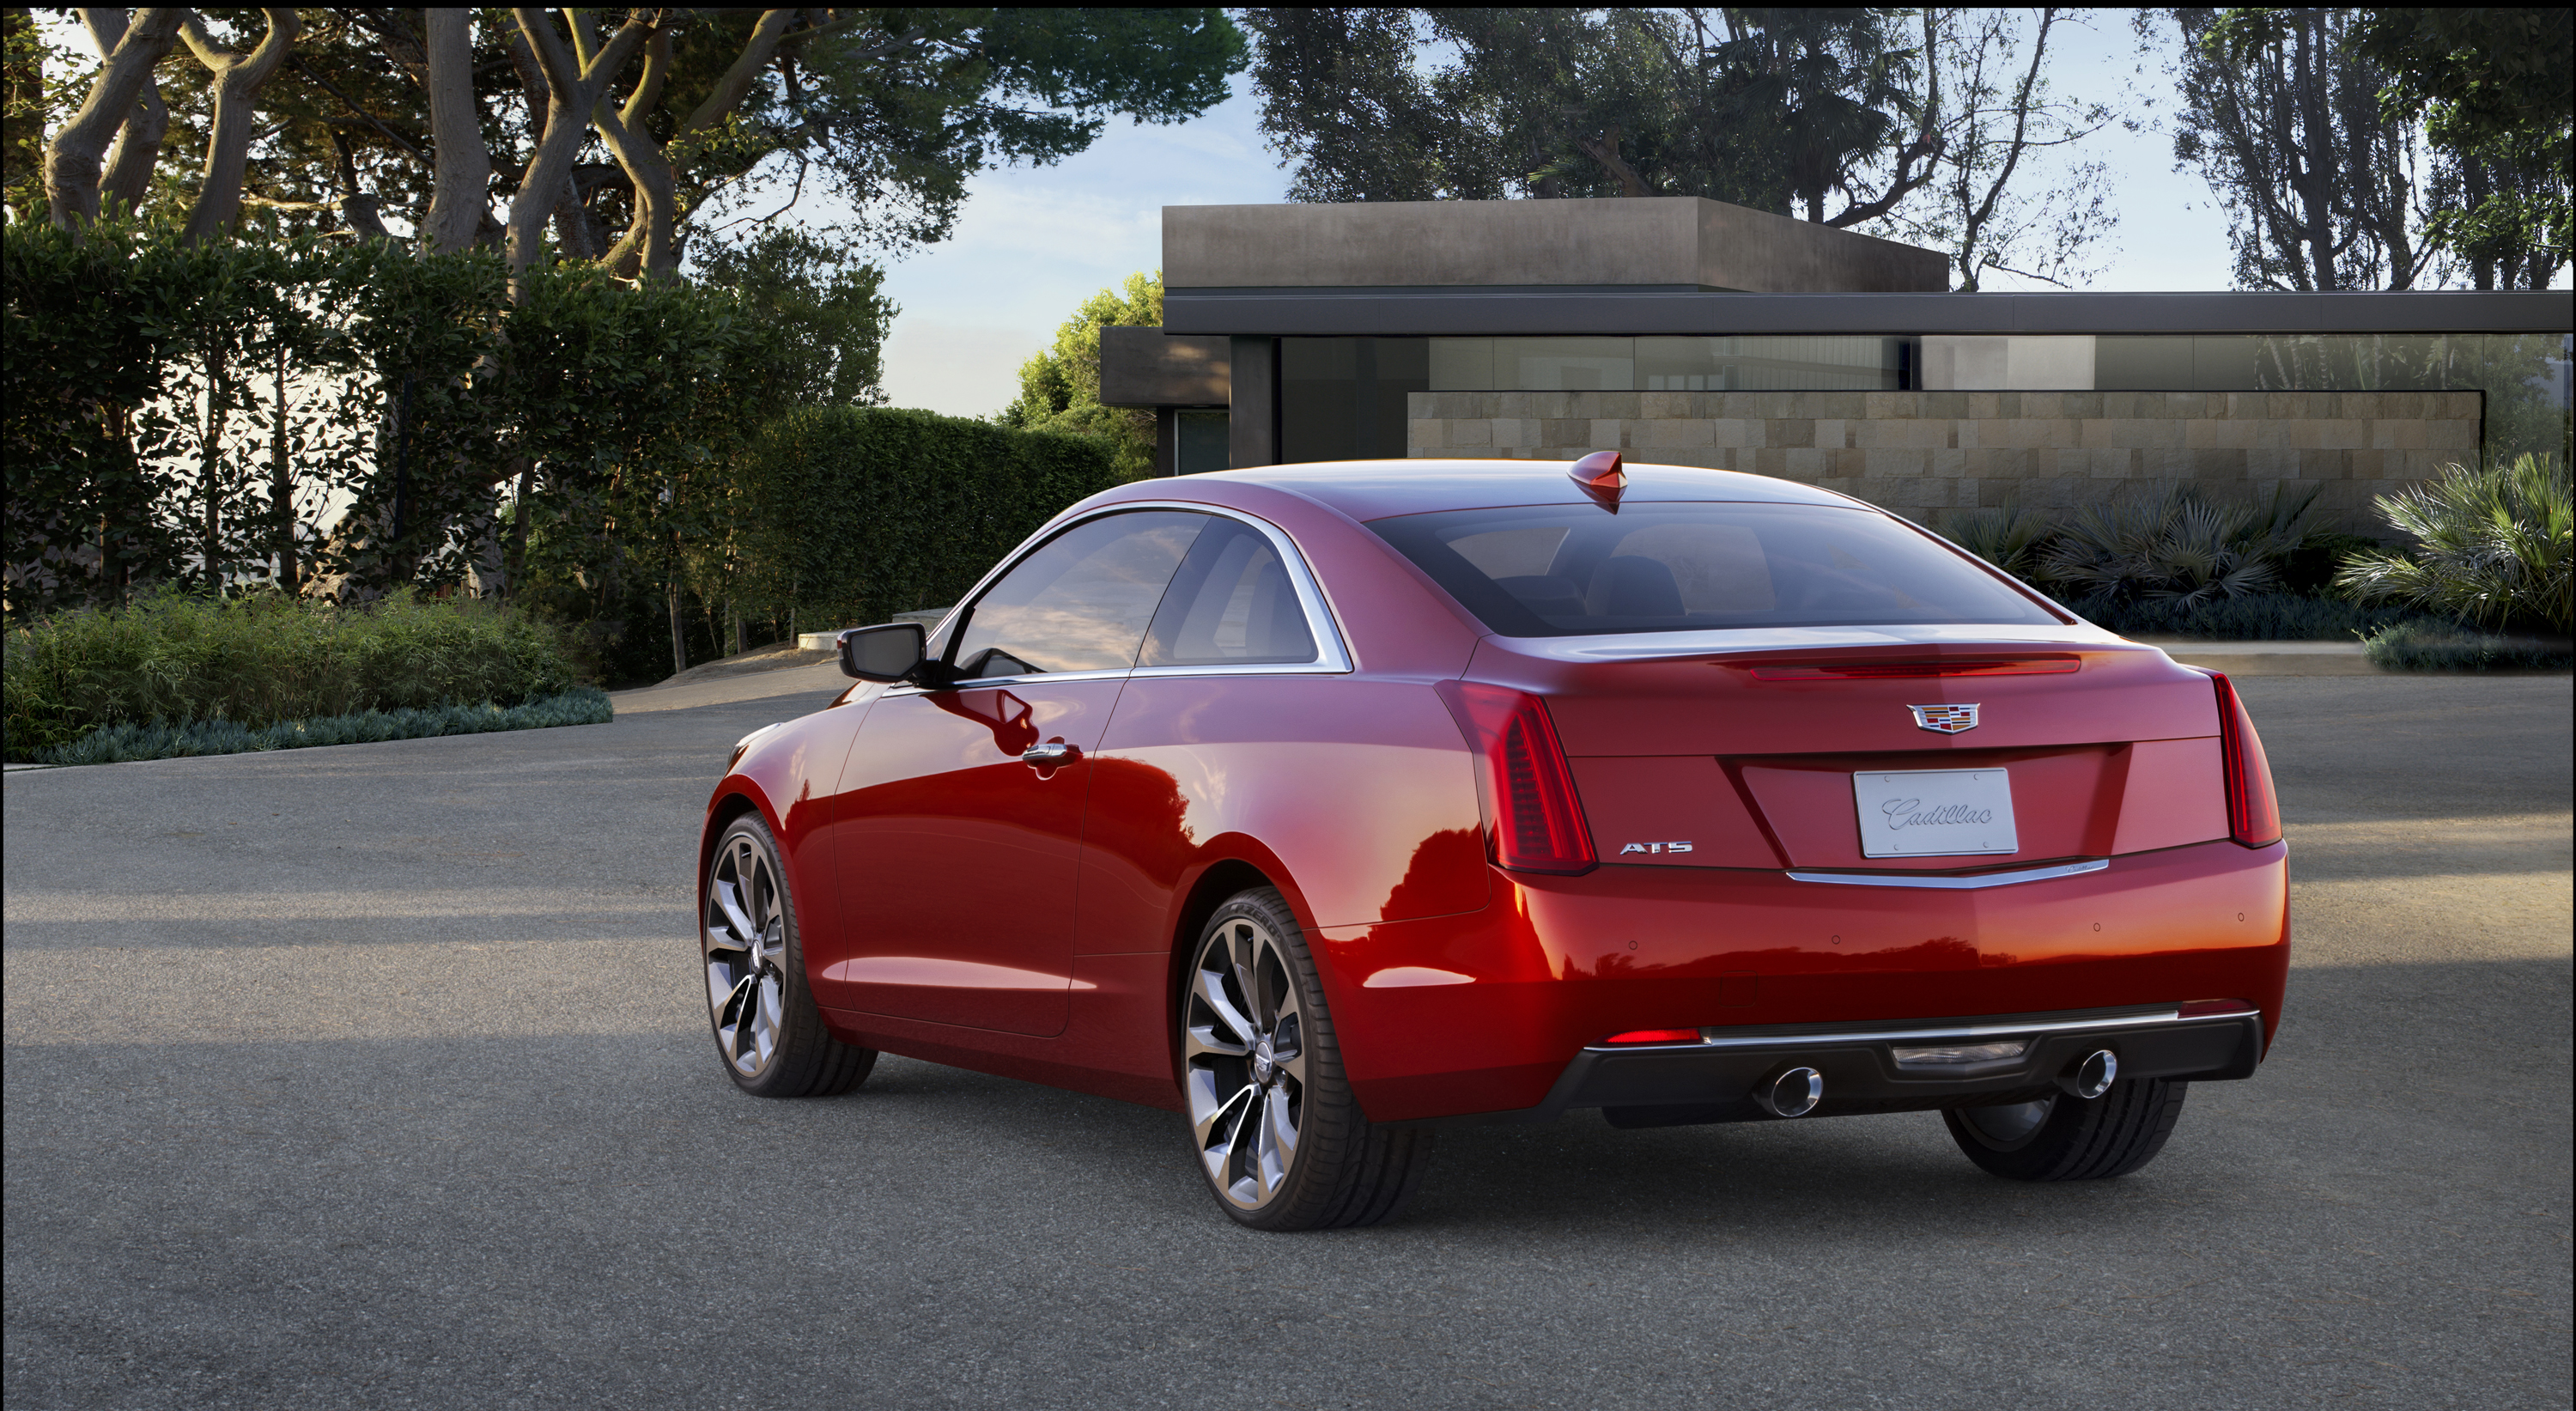 2015 Cadillac ATS Coupe adds OnStar with 4G LTE